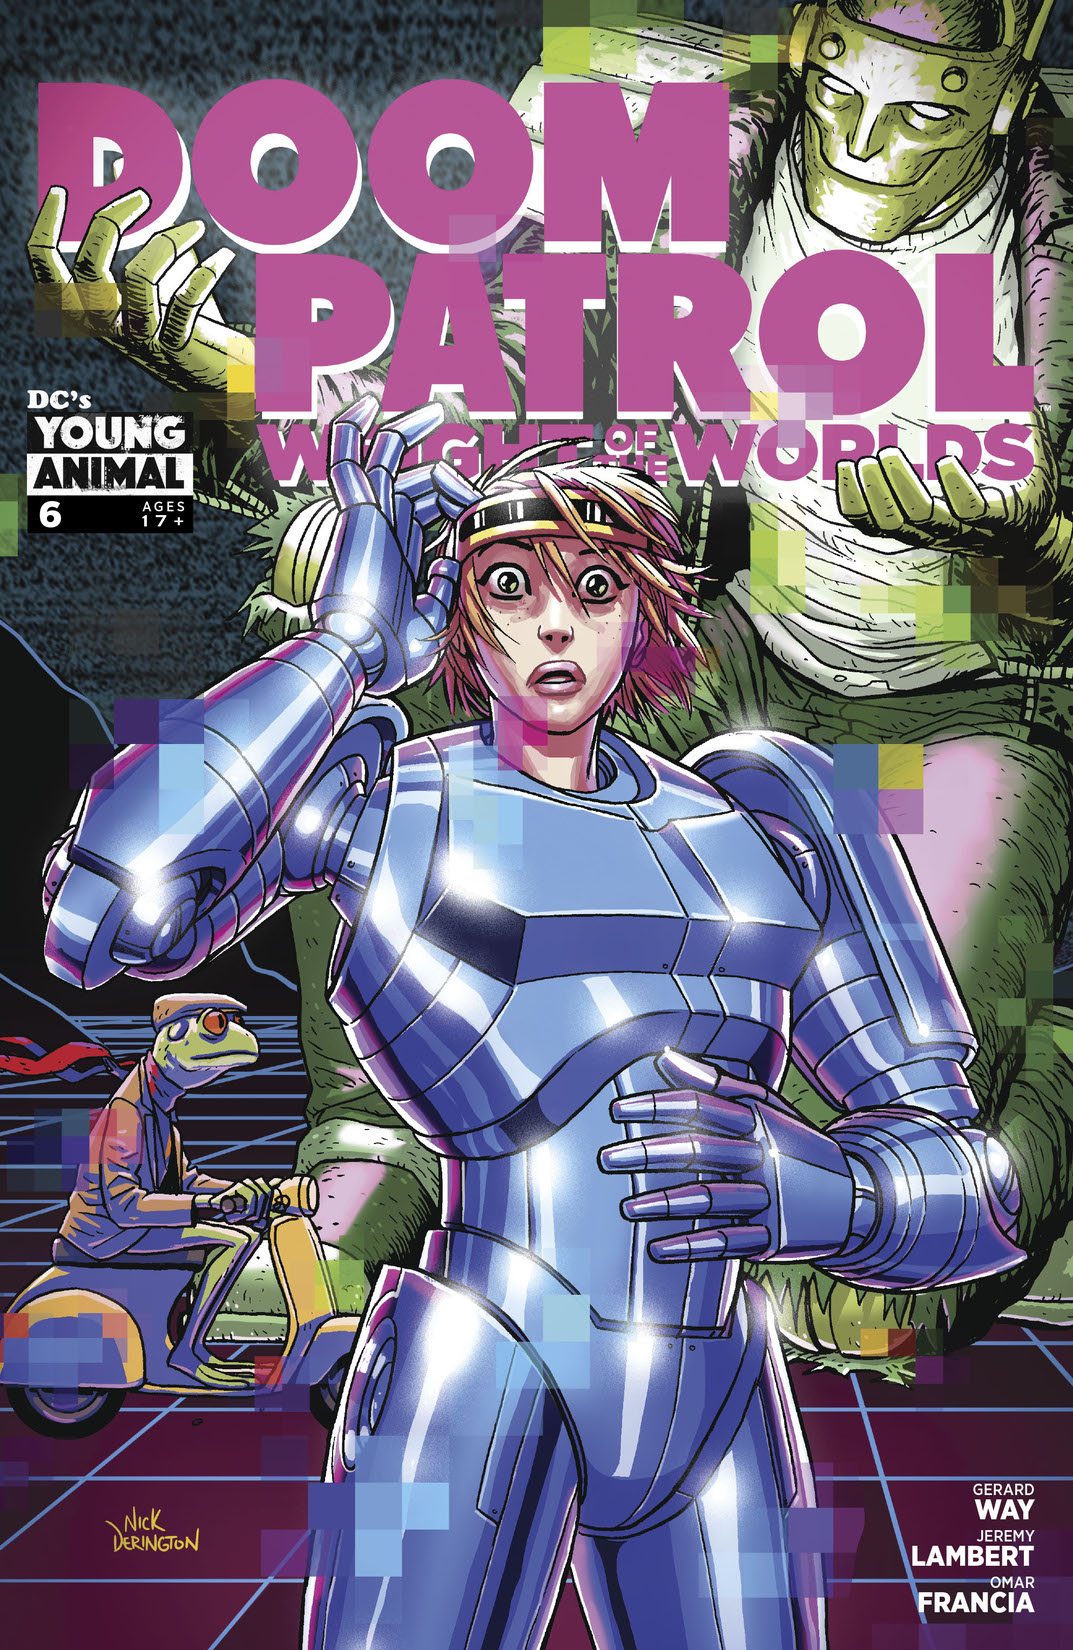 Doom Patrol: Weight of the Worlds #6 preview images